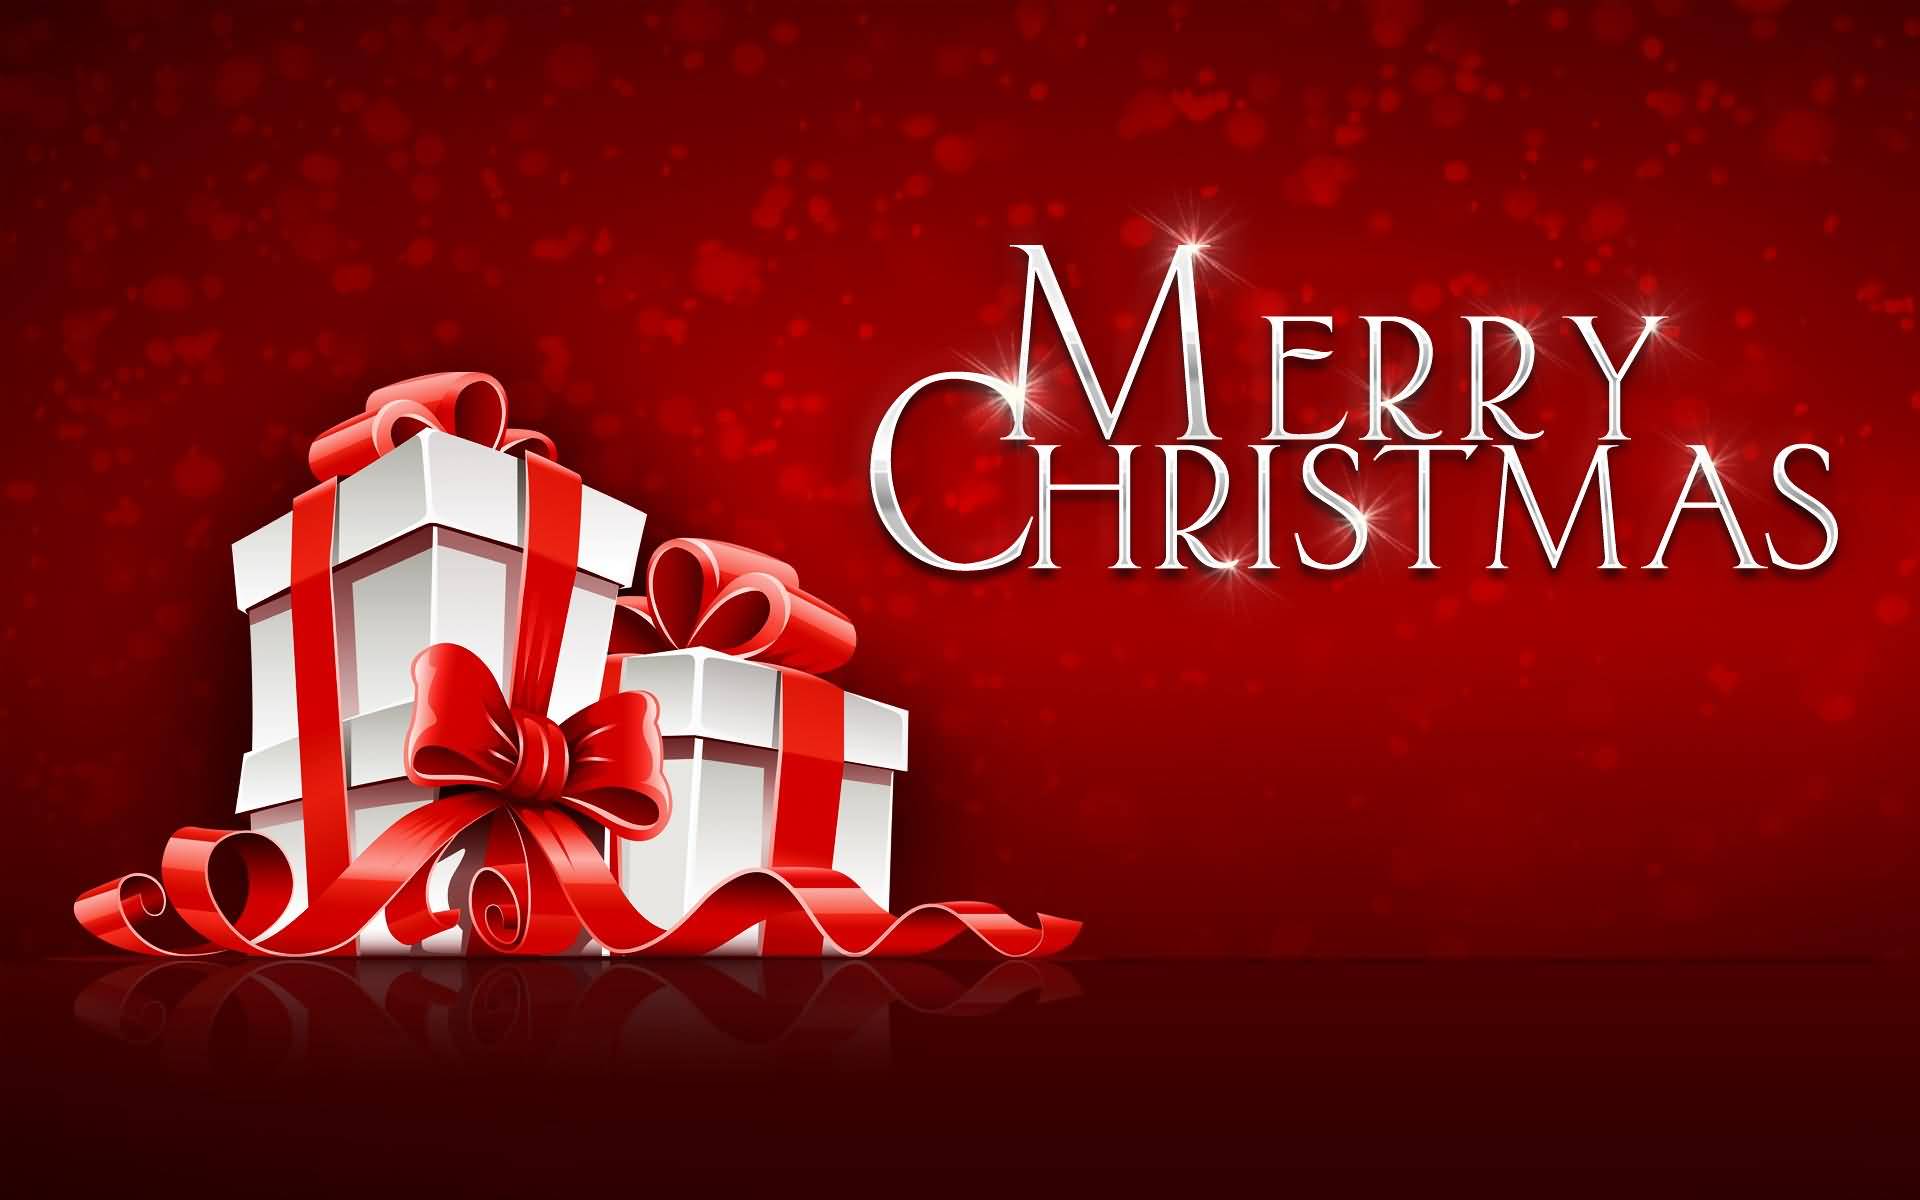 20 Merry Christmas Cards Greetings & Wallpapers